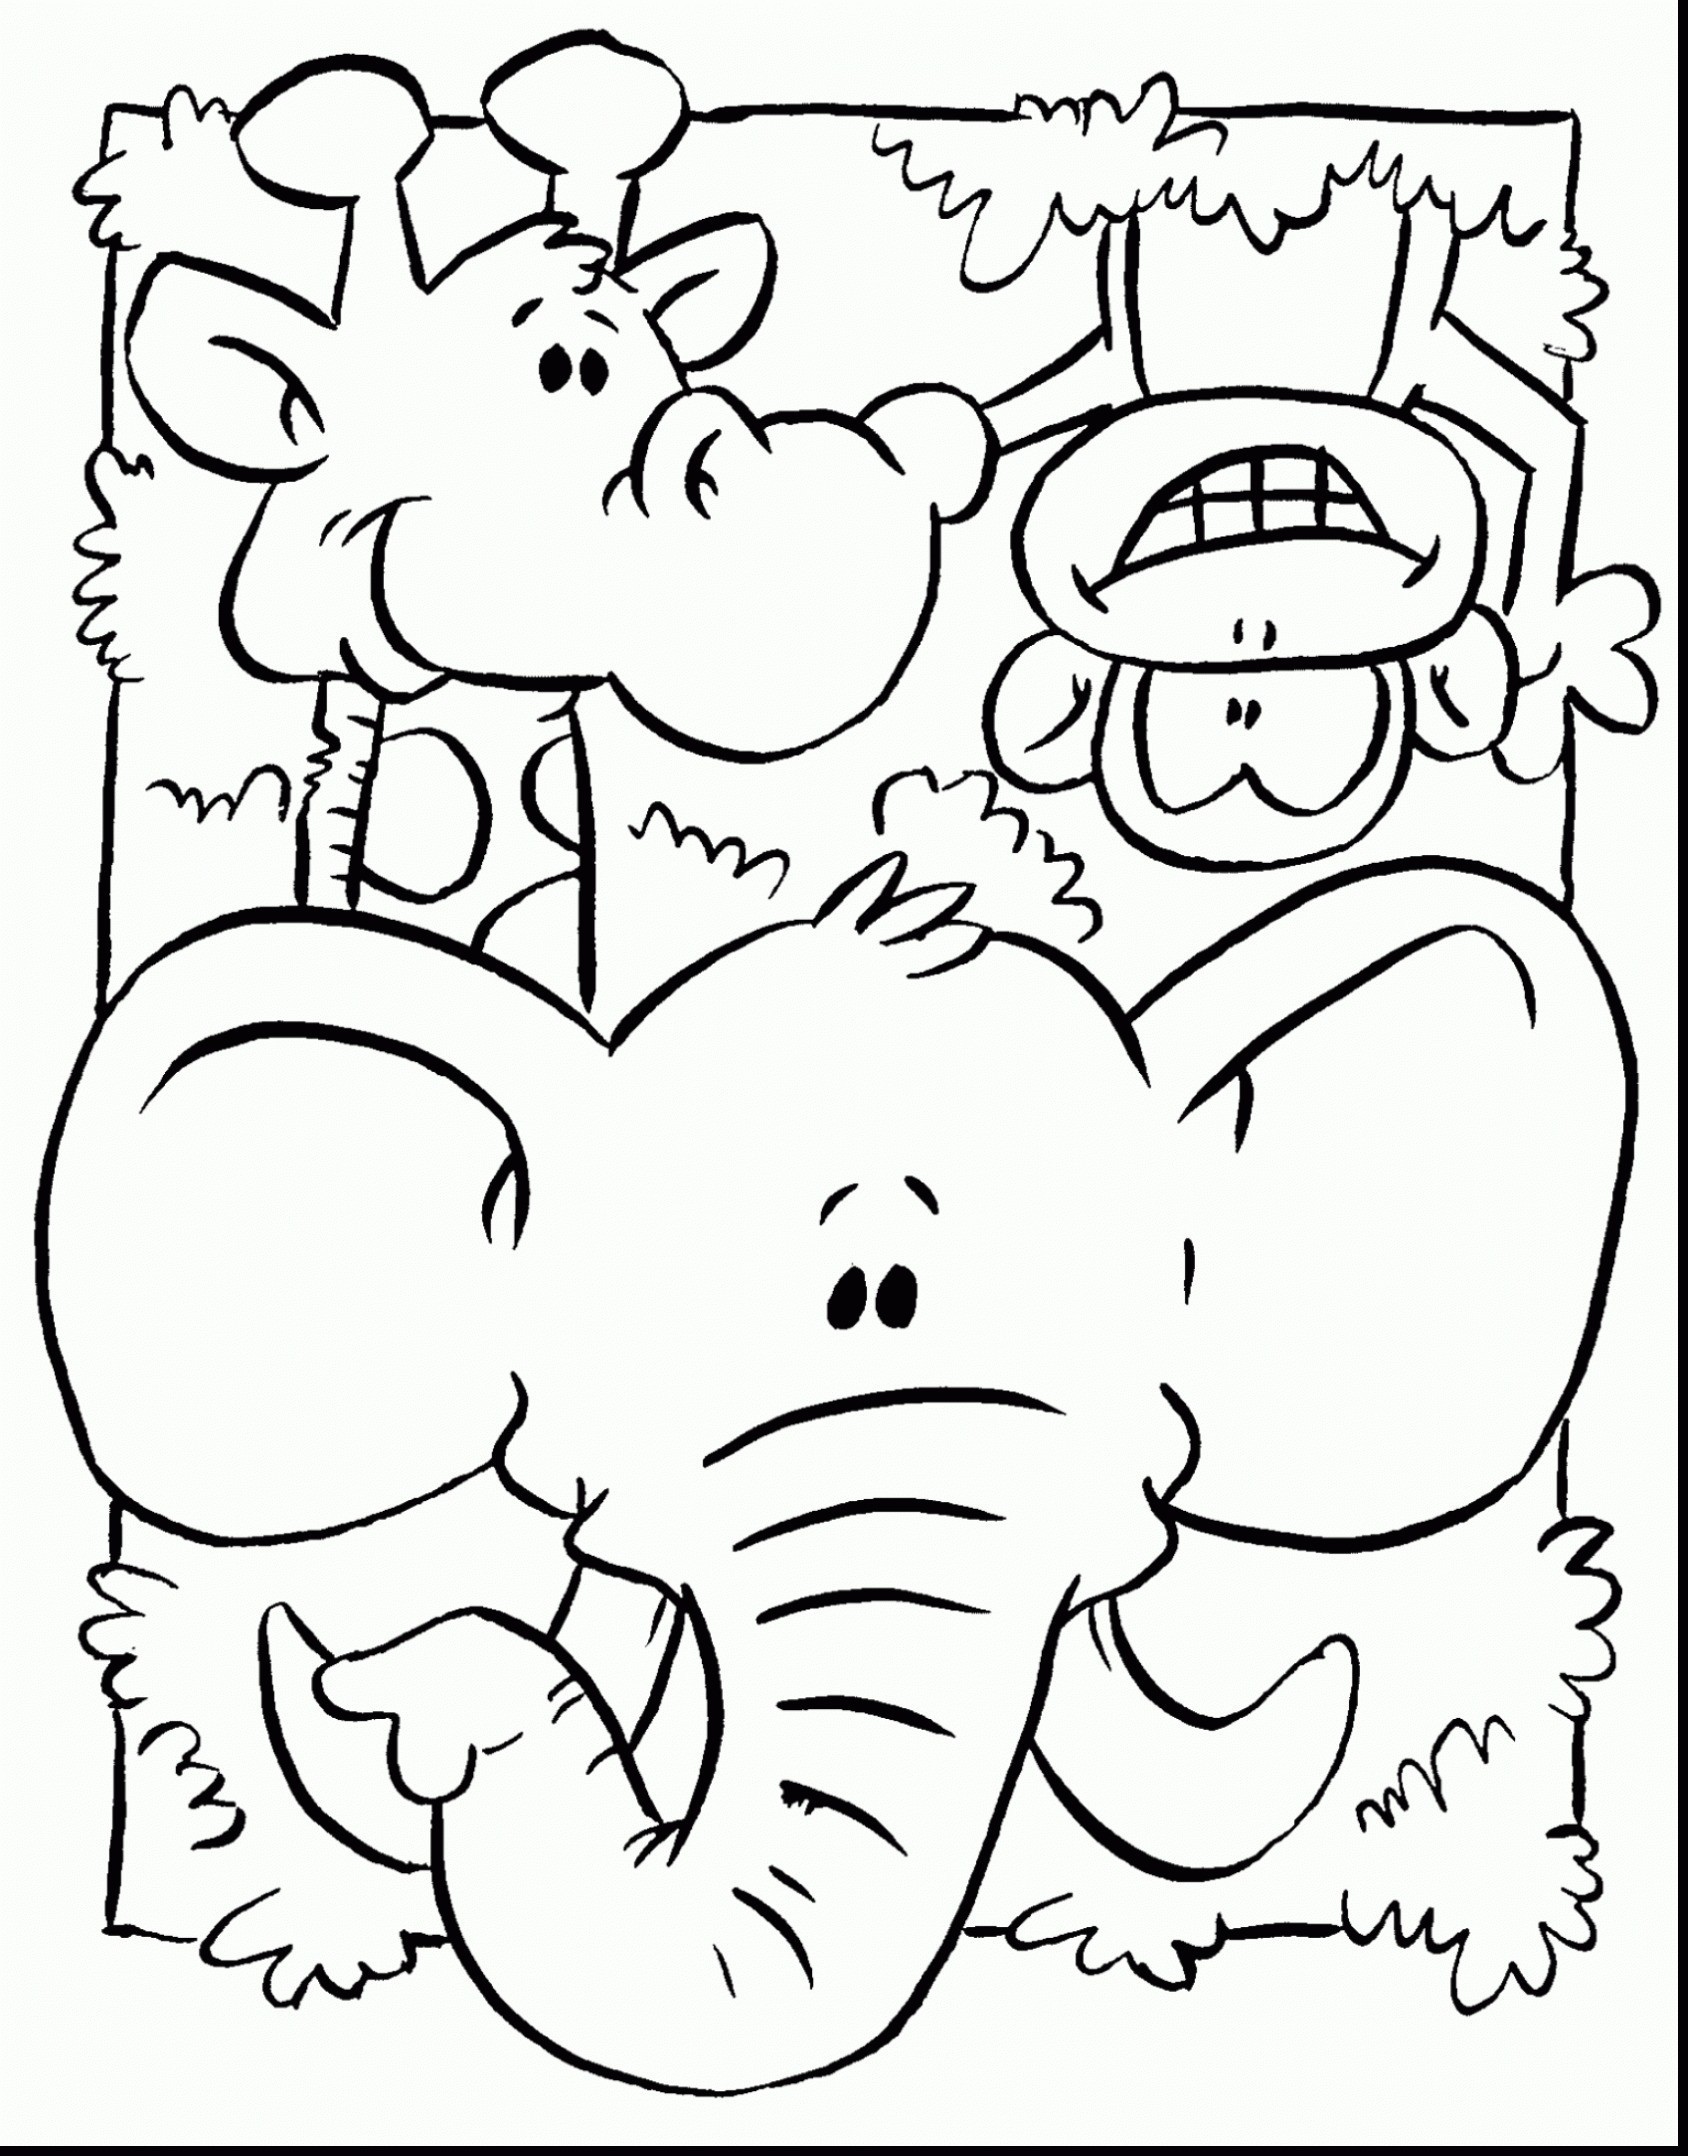 Zoo Animals Coloring Pages Fresh Zoo Animals Coloring Pages Free Coloring Library